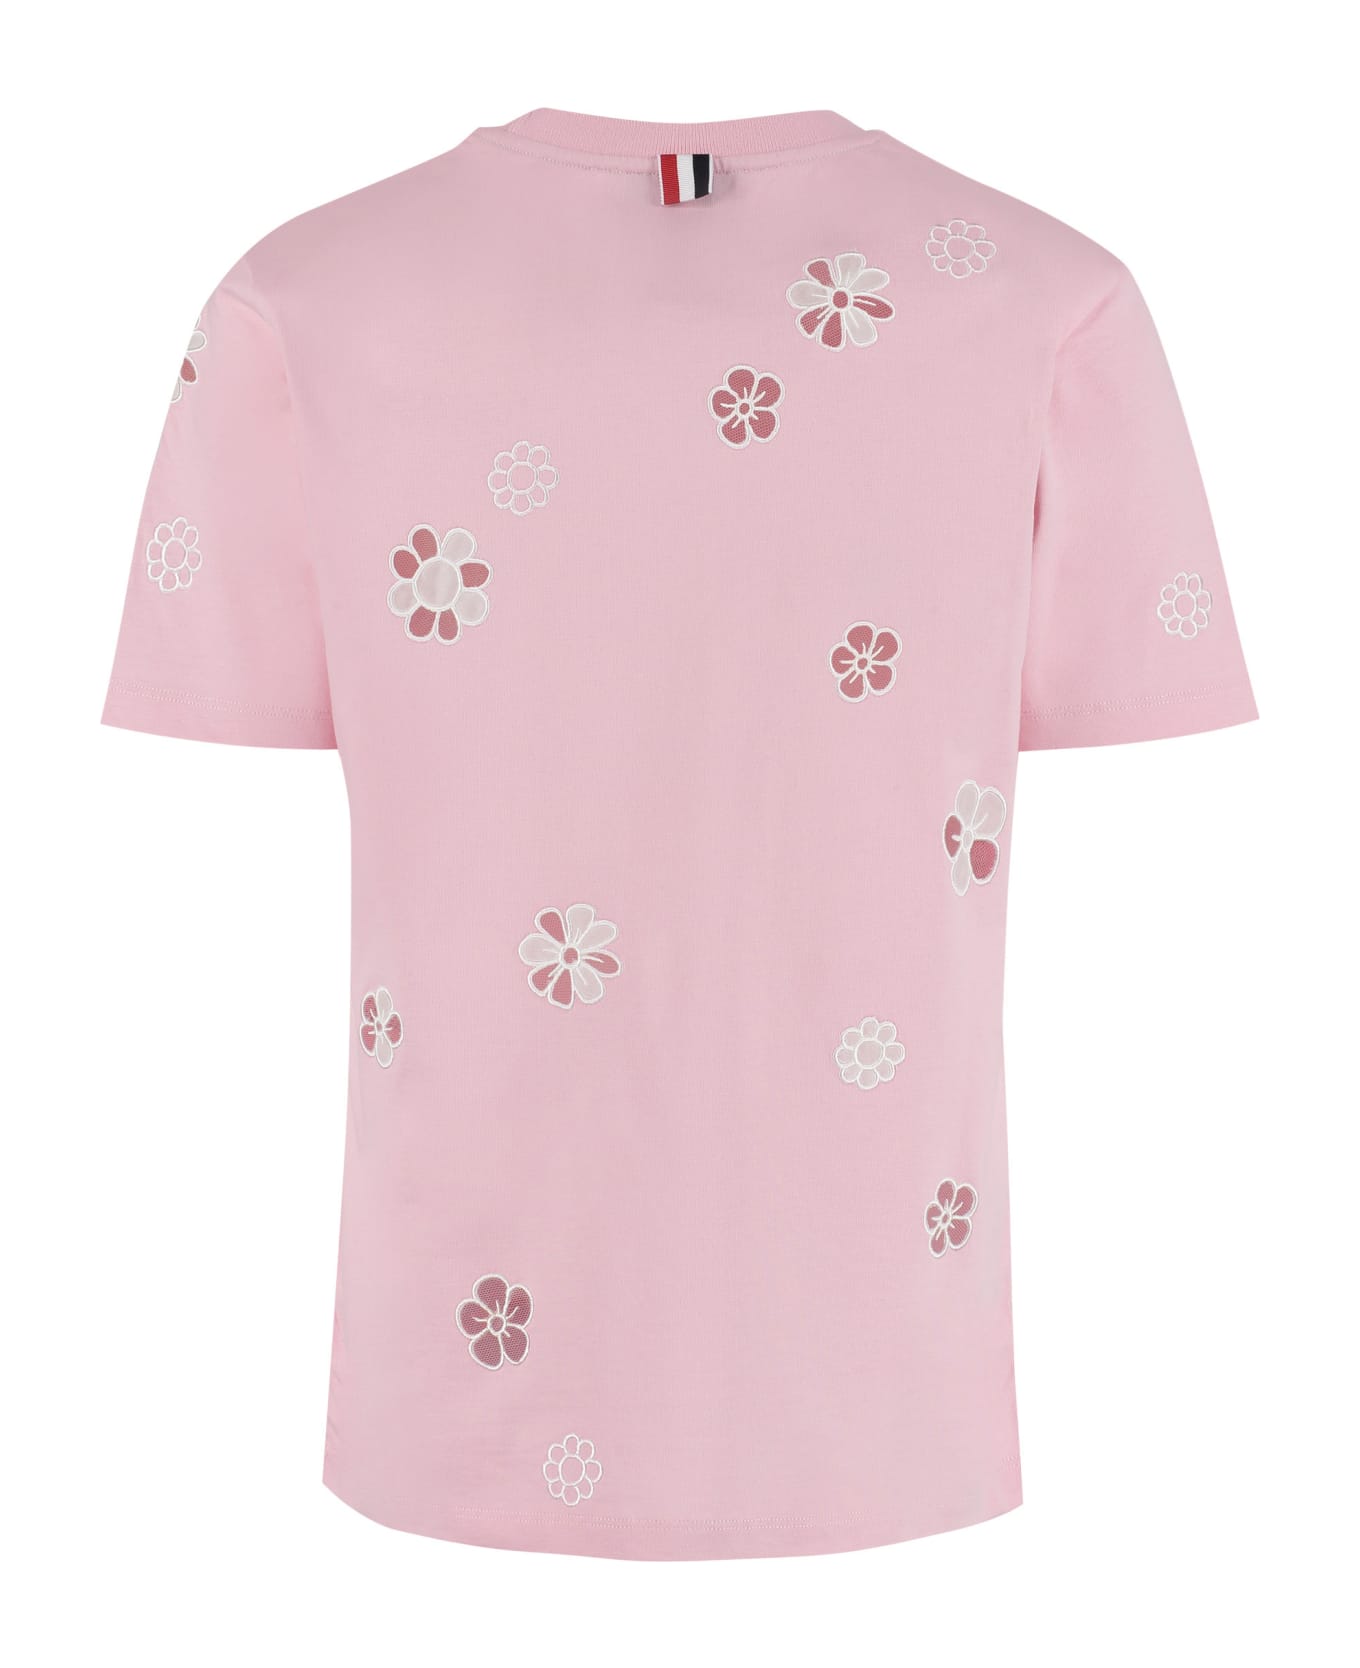 Thom Browne Embroidered Cotton T-shirt - Pink Tシャツ